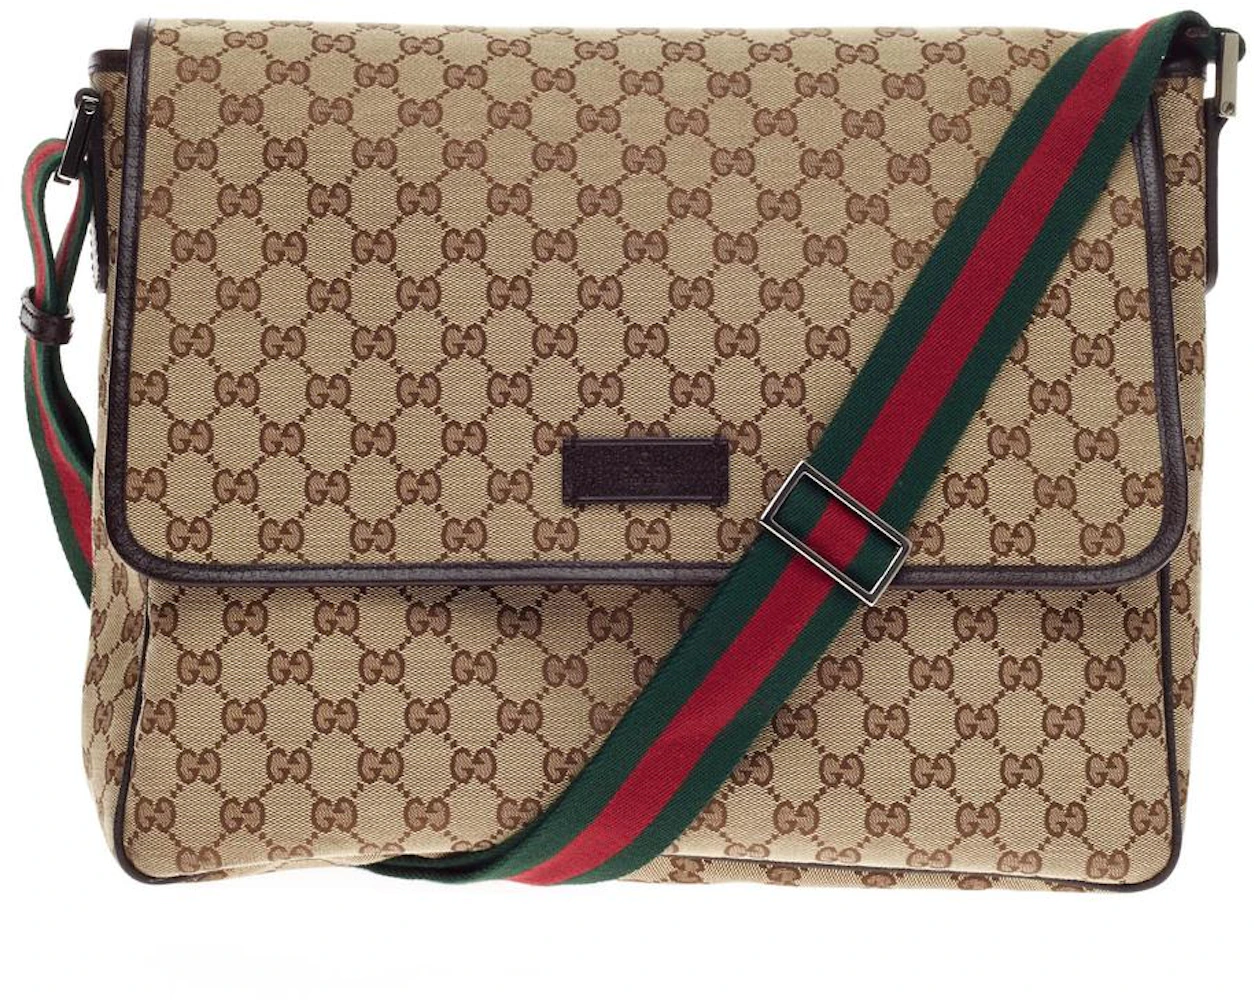 Gucci White/Navy Blue GG Canvas and Leather Medium Vintage Web